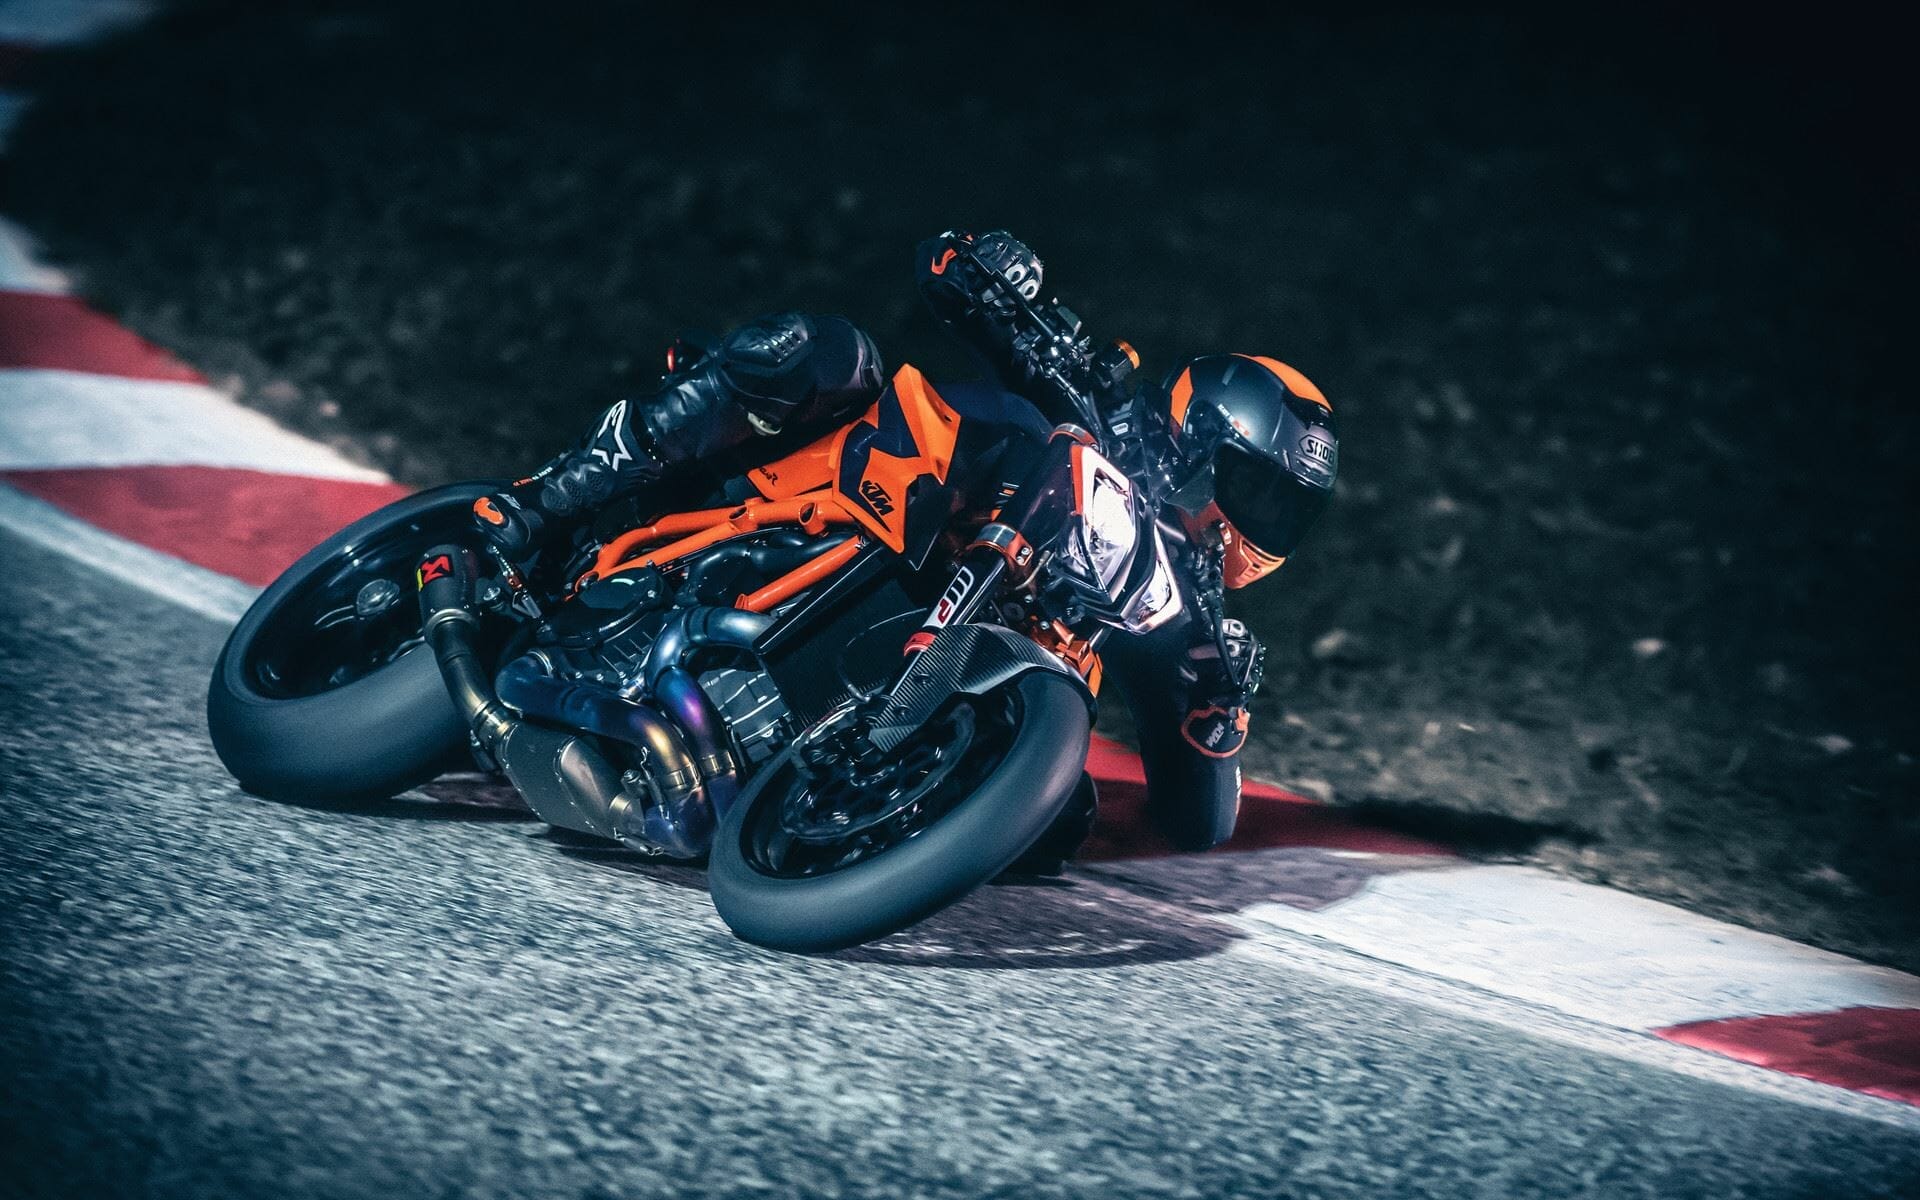 An Extreme KTM 1290 Super Duke RR should come
- also in the App MOTORCYCLE NEWS